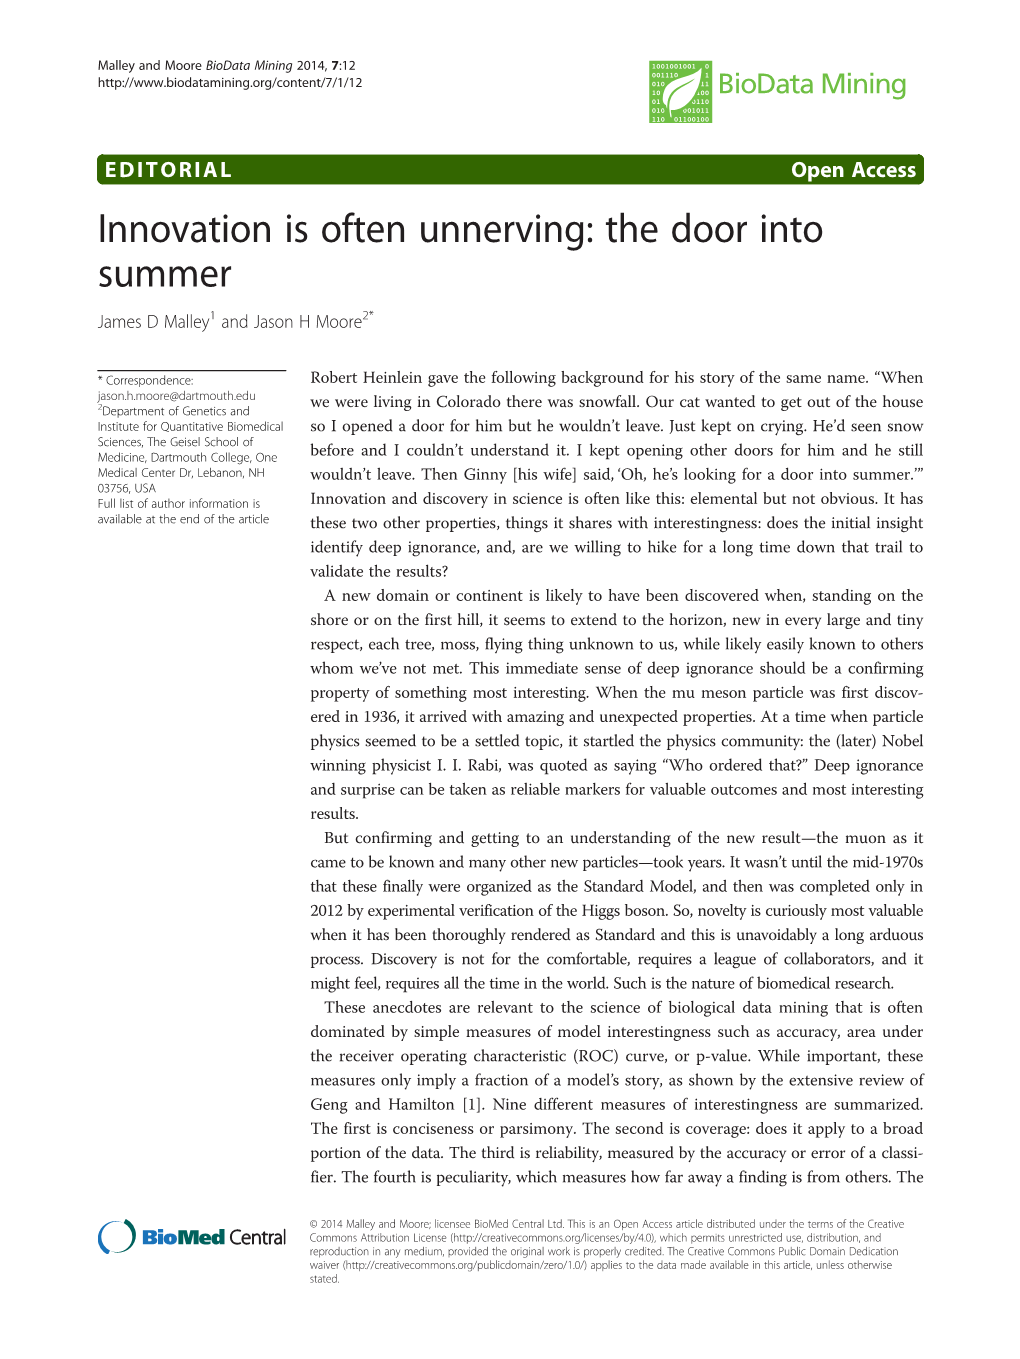 Innovation Is Often Unnerving: the Door Into Summer James D Malley1 and Jason H Moore2*